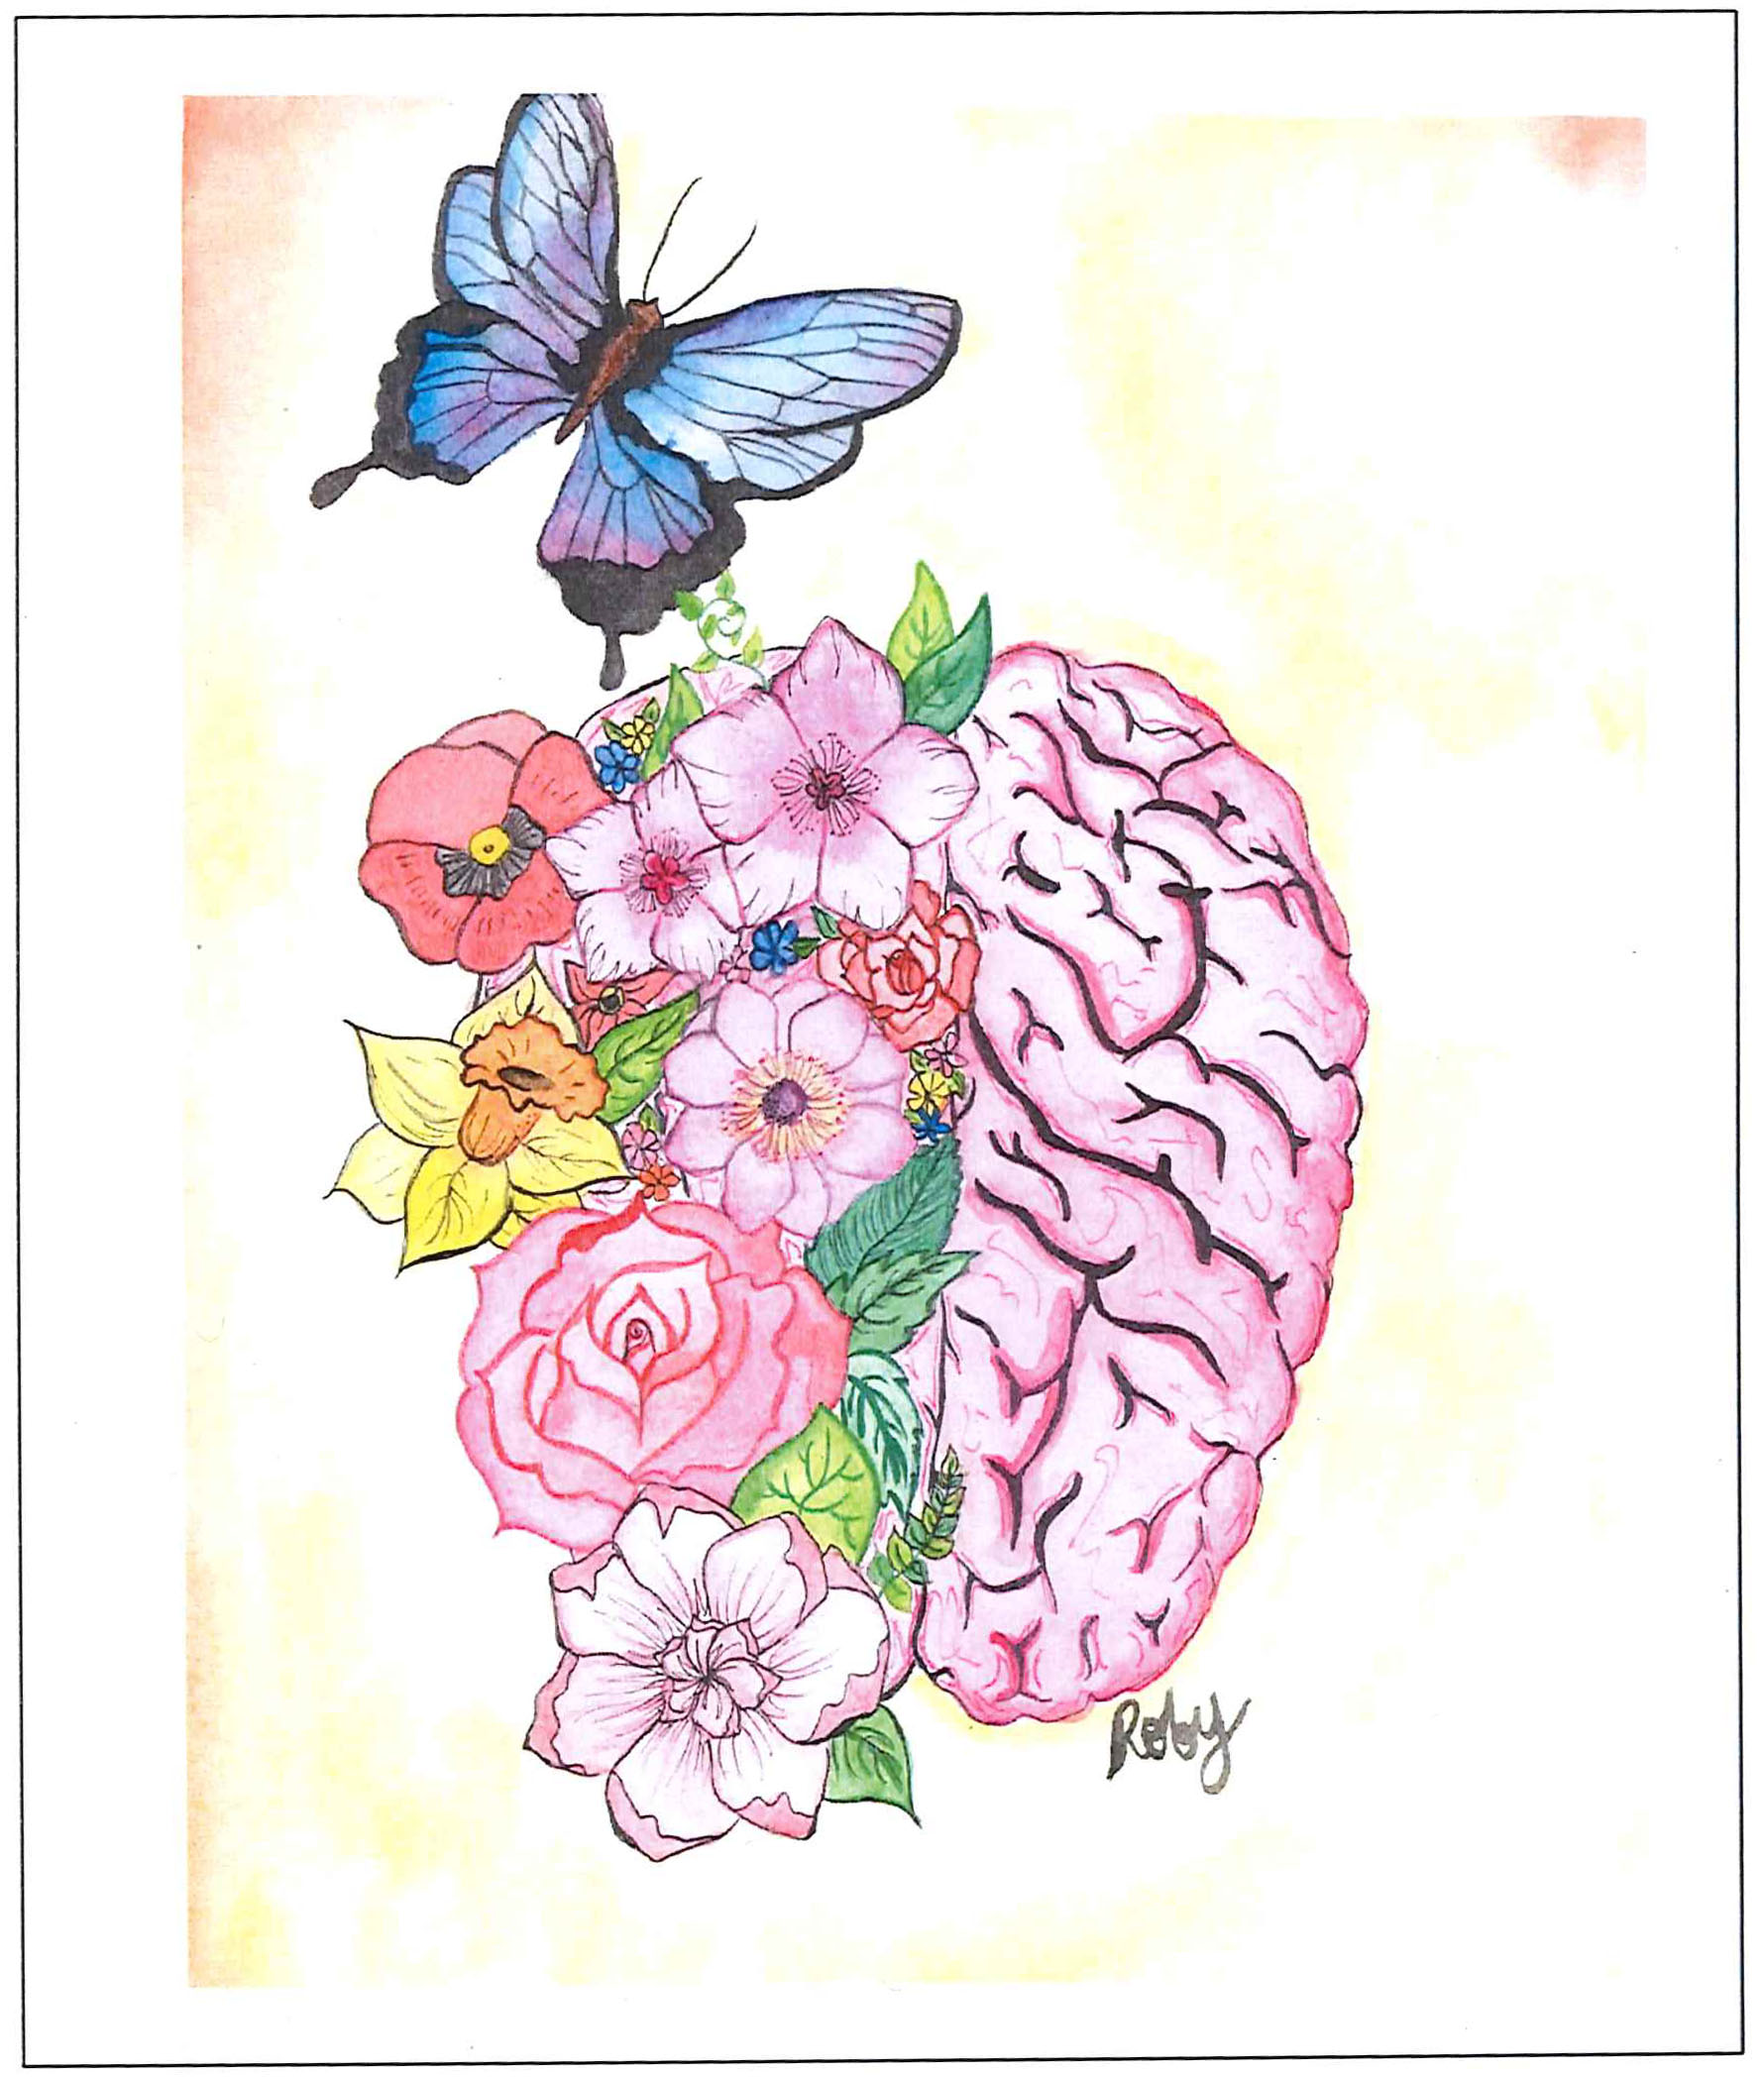 Neuroscience For Kids - 2019 drawing contest